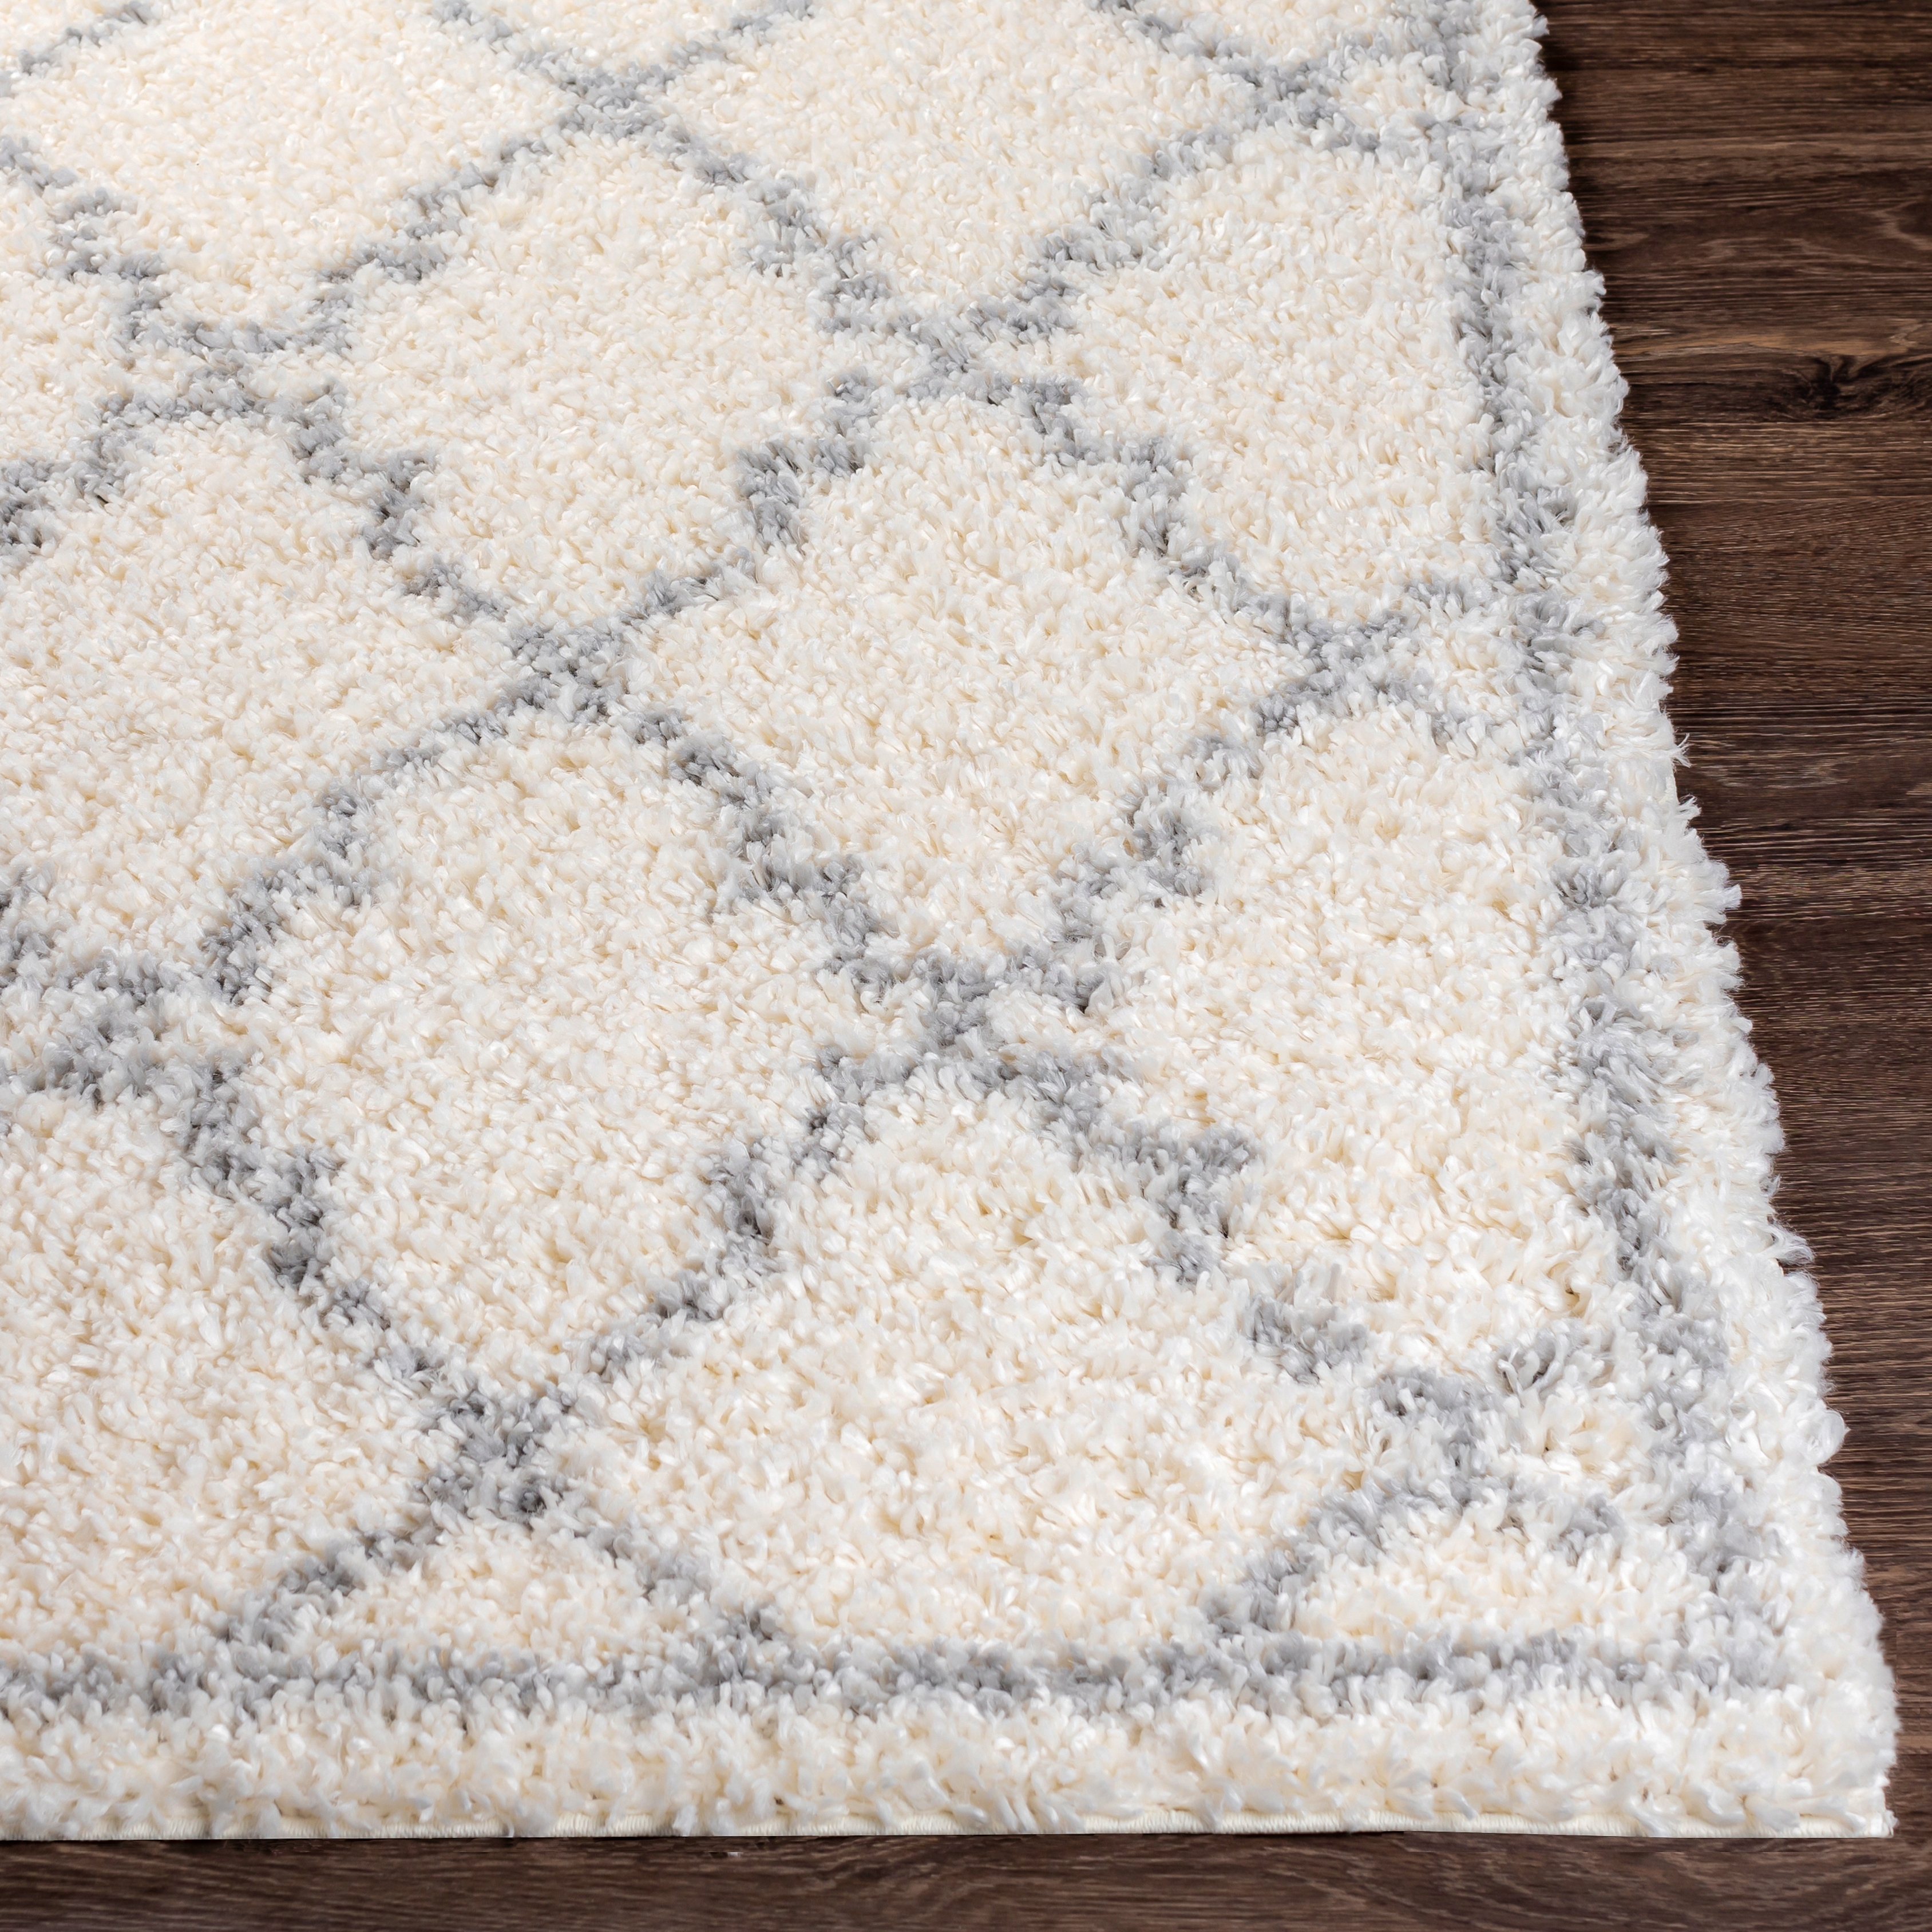 Deluxe Shag Rug, 5'3" x 7'3" - Image 2